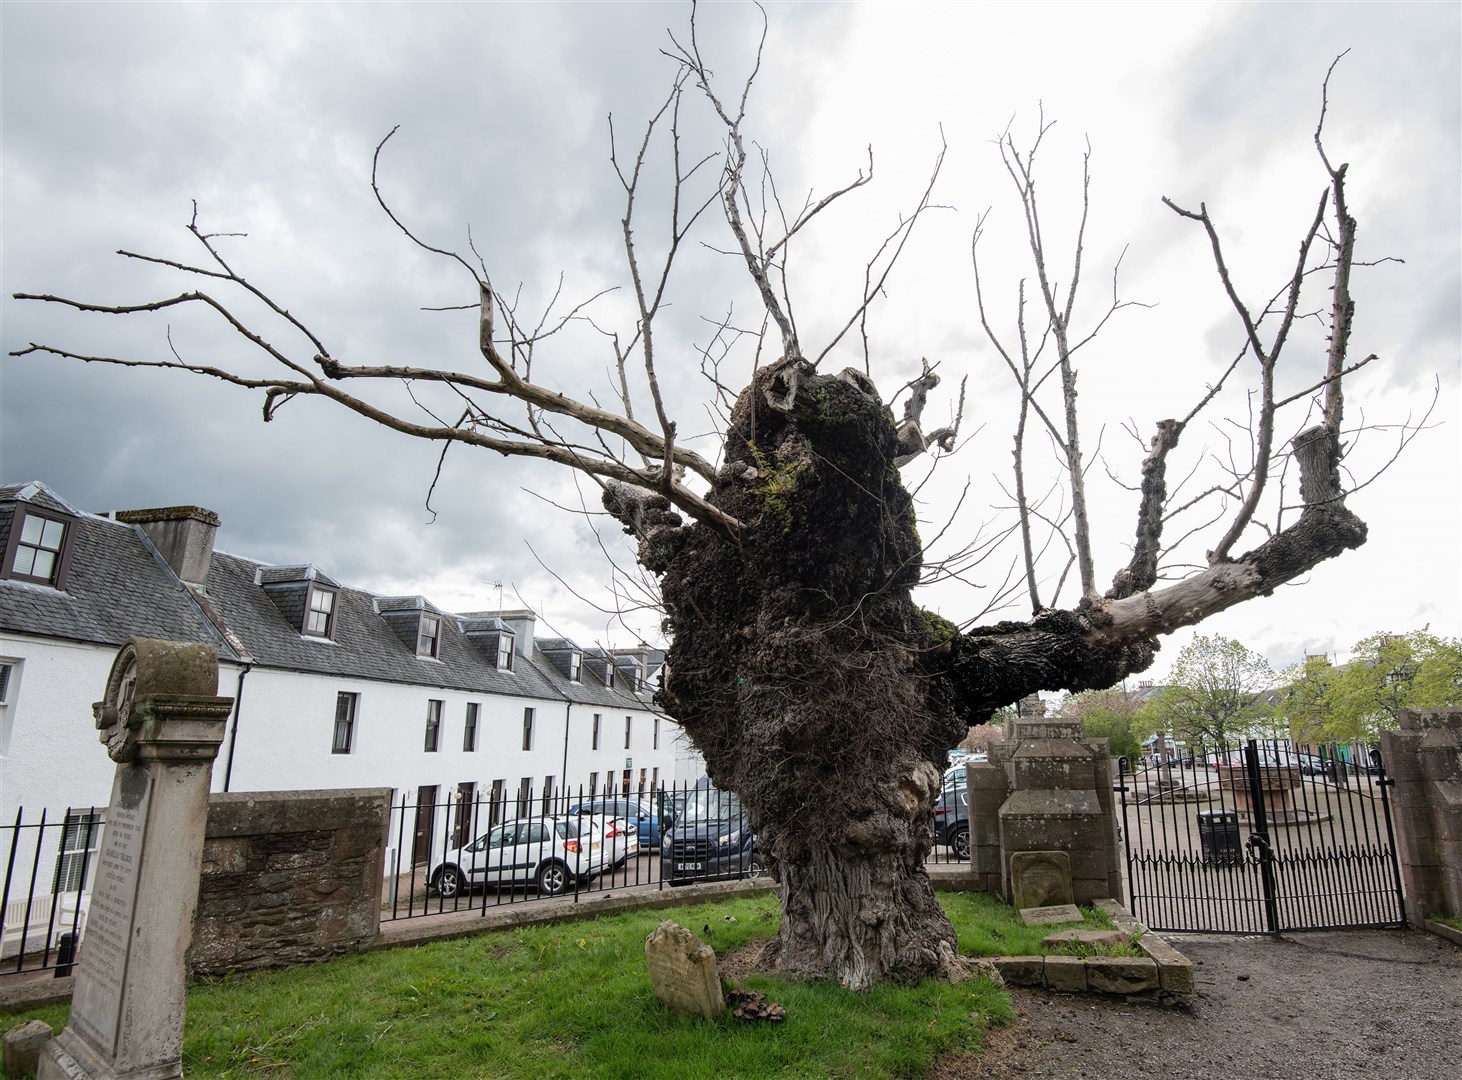 The Beauly Elm was thought to be about 800 years old.